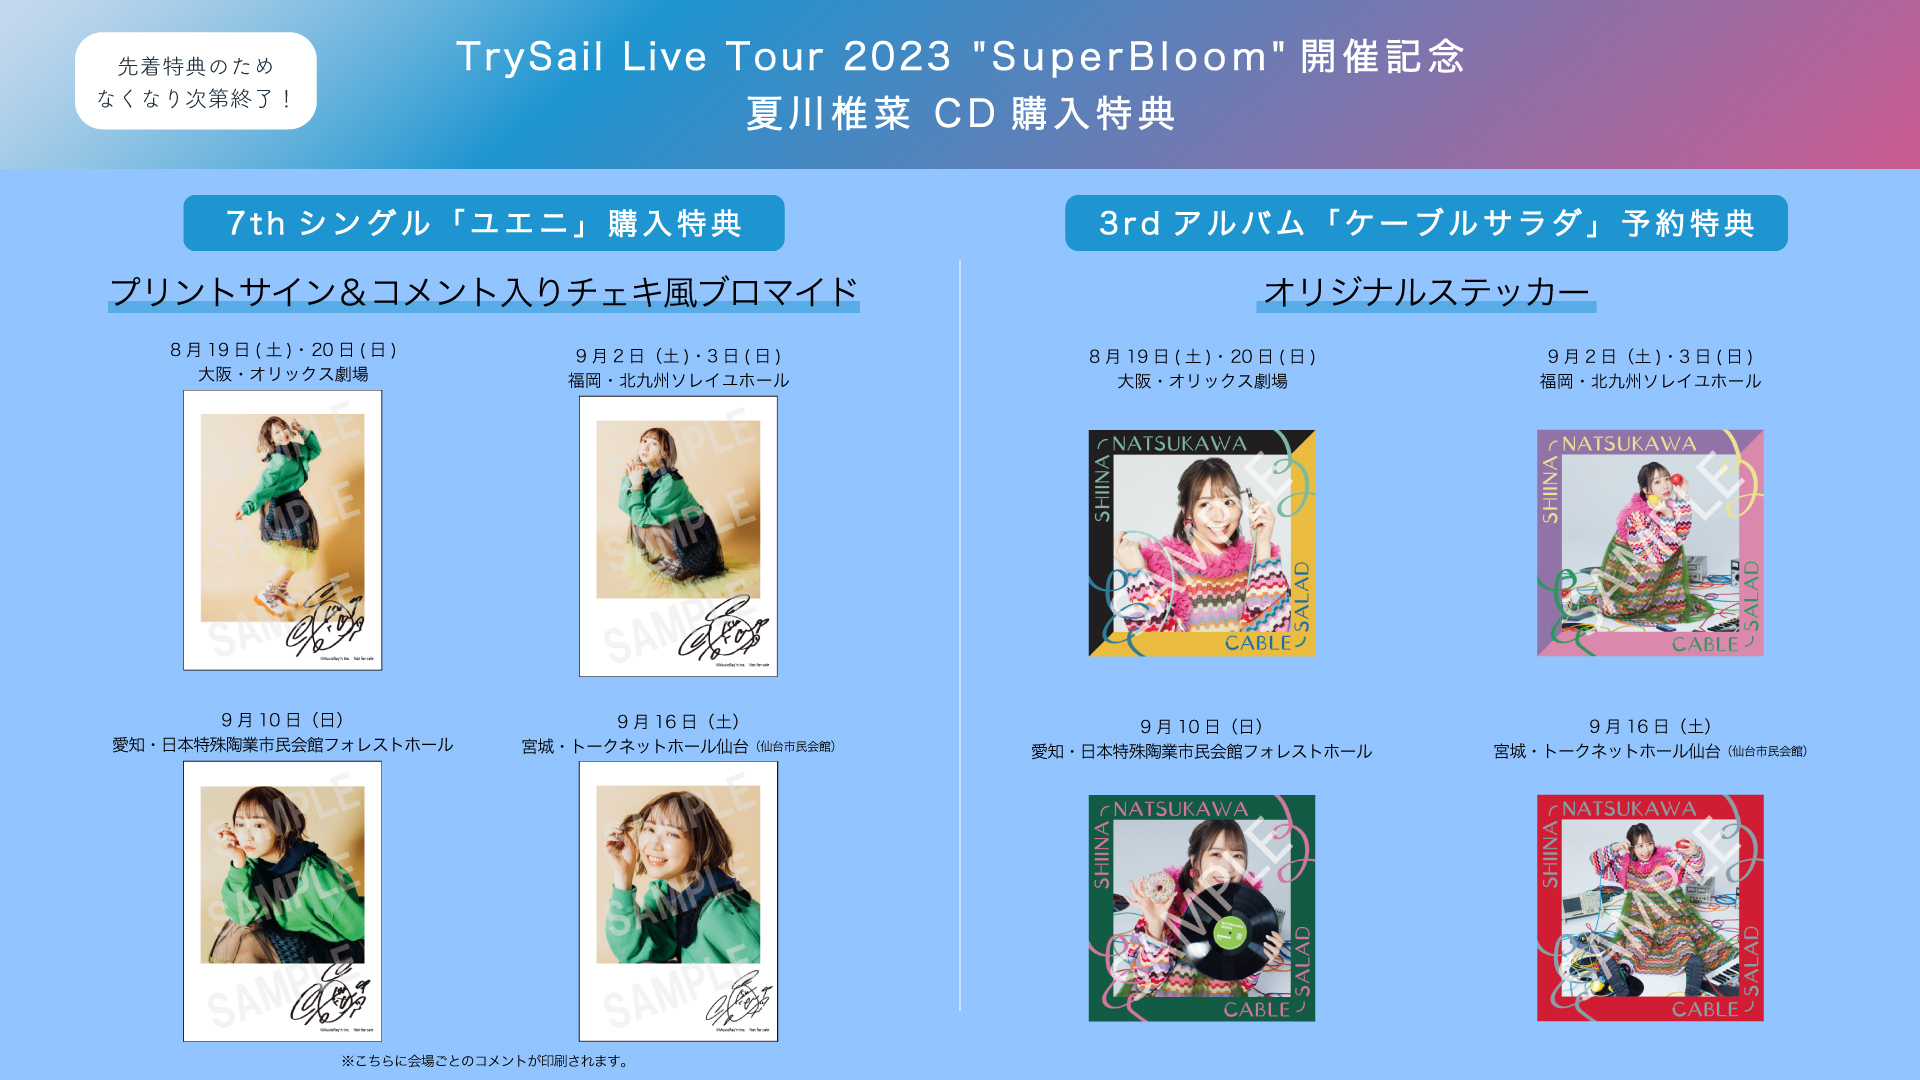 LAWSON presents TrySail Live Tour 2023 